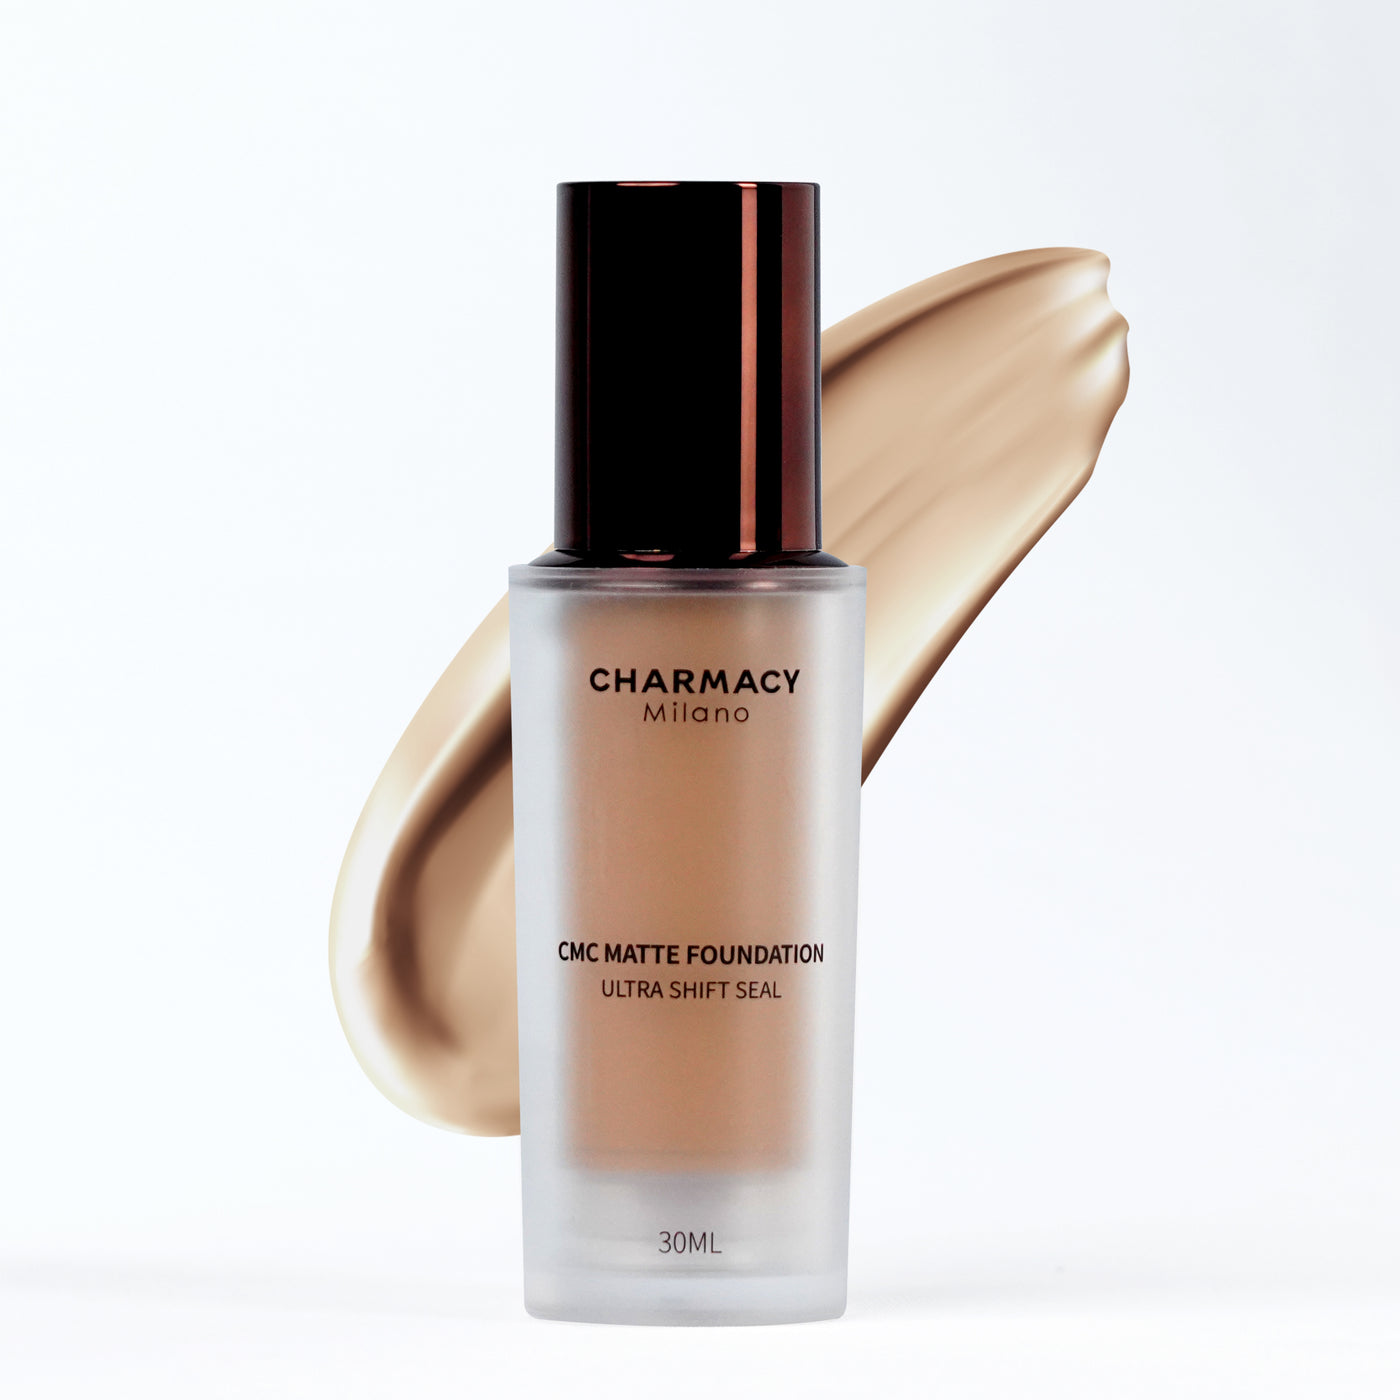 Charmacy Milano | Matte Perfection Foundation